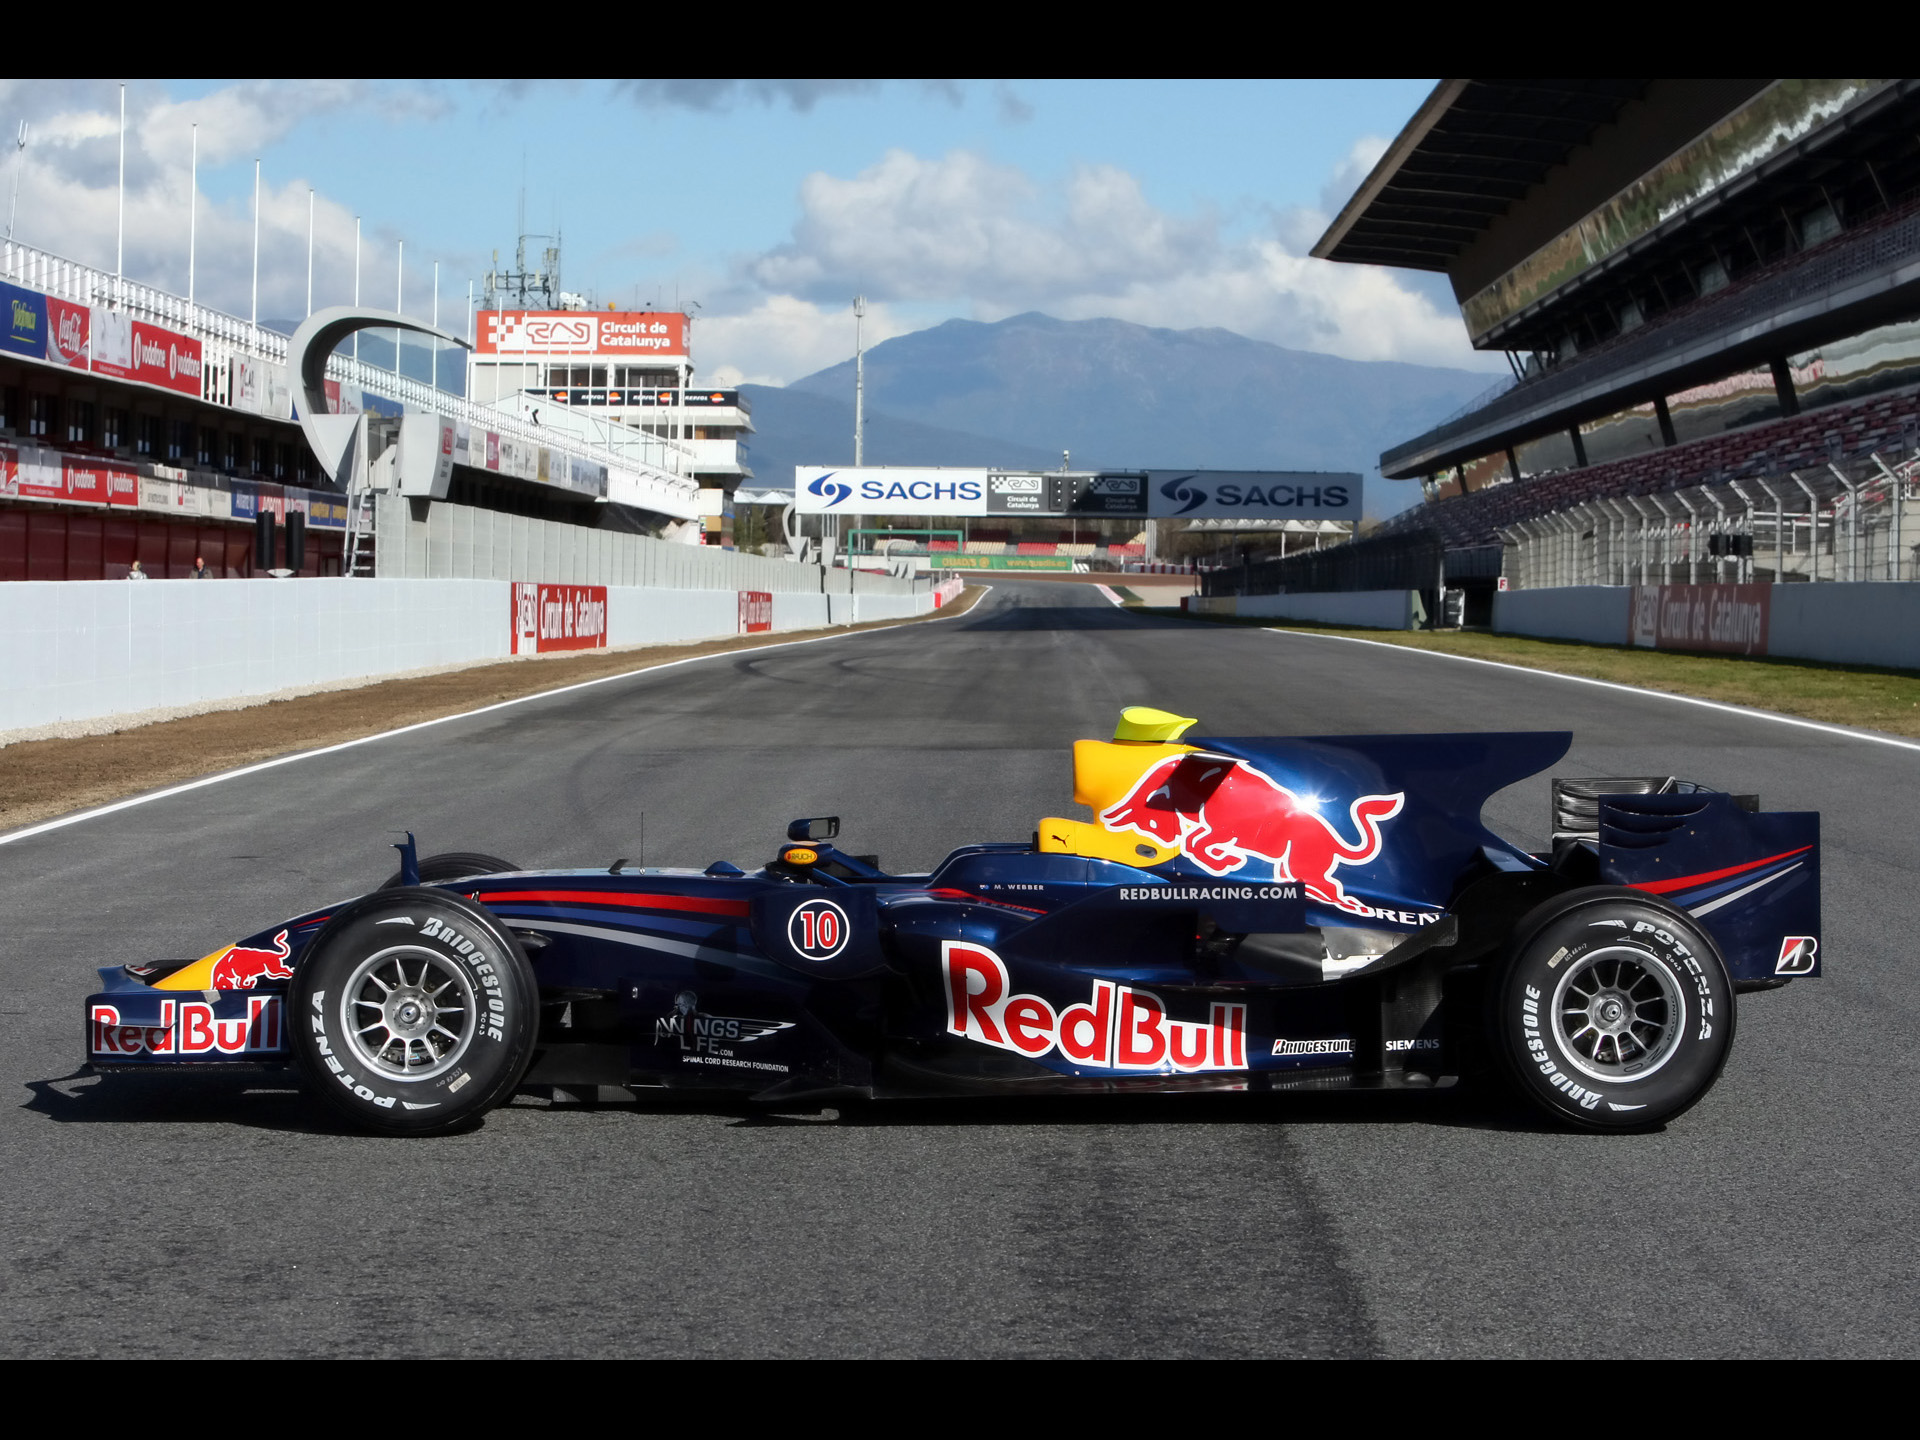 Red Bull RB4 Photo Gallery: Photo #02 out of 9, Image Size - 300 x ...